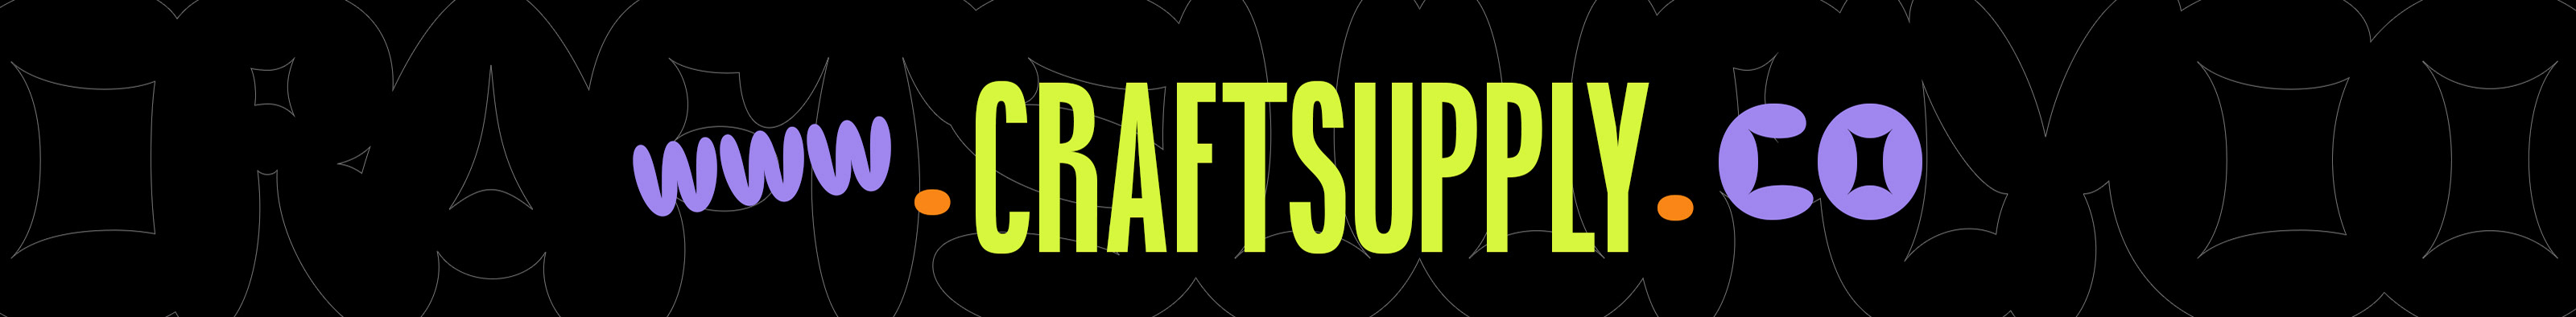 Craft Supply Co.'s profile banner